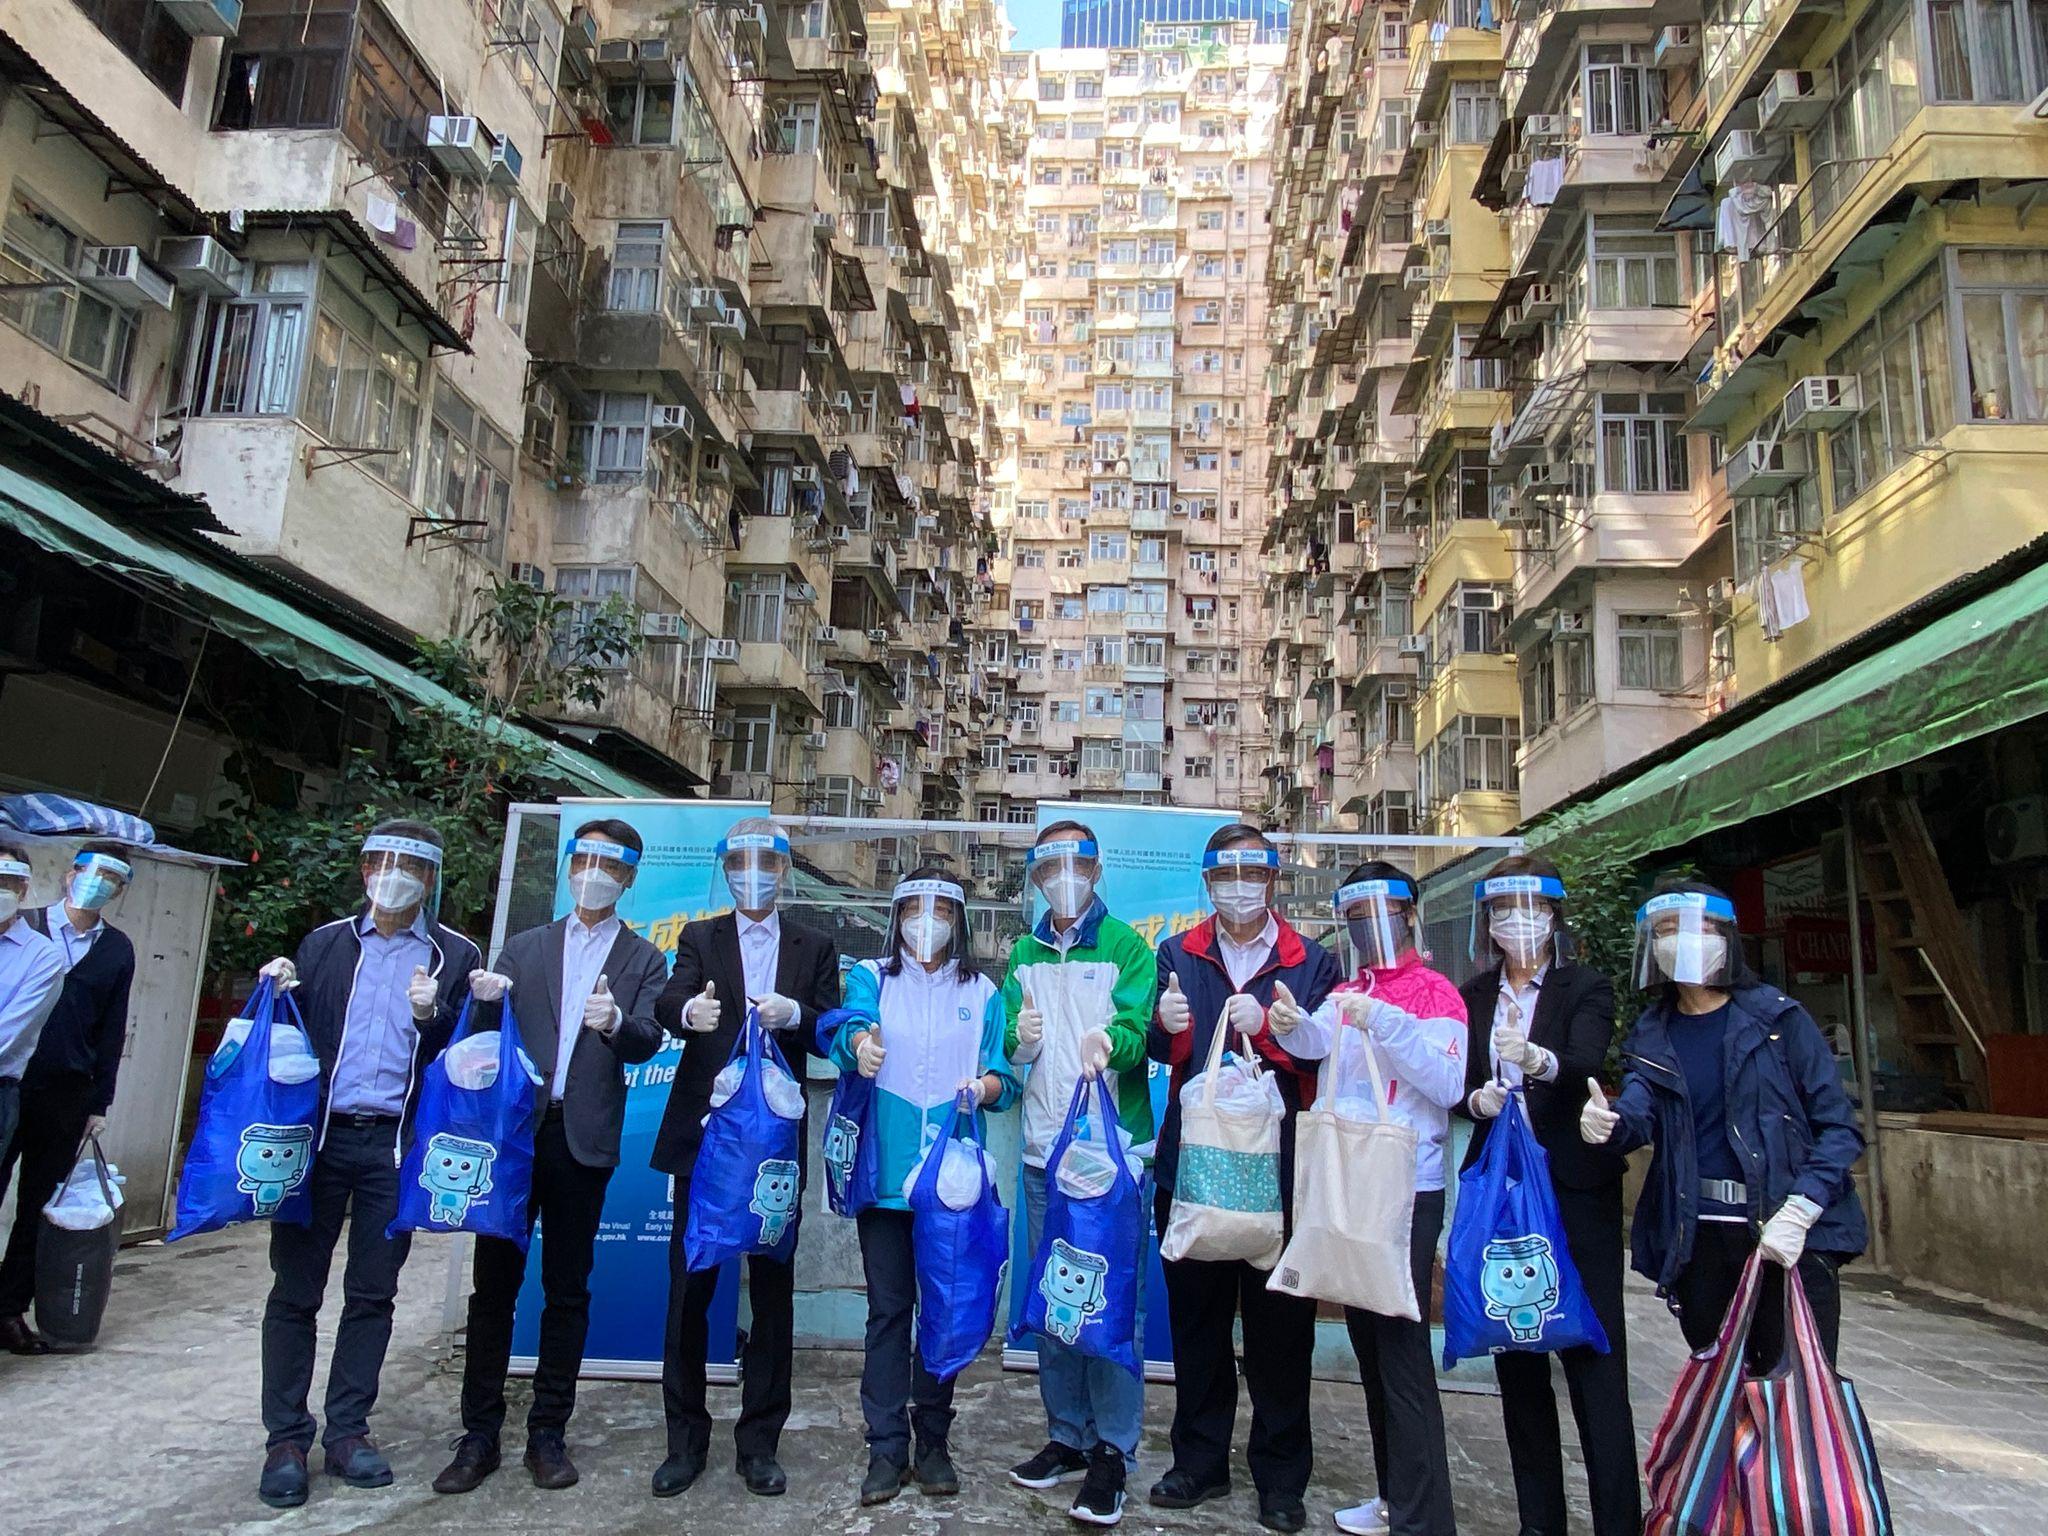 The Secretary for Development, Mr Michael Wong, together with staff members from the Development Bureau and the departments under its purview, today (April 4) distributed anti-epidemic service bags to residents including grassroots families in Quarry Bay. Photo shows (left to right) the Director of Lands, Mr Andrew Lai; the Director of Planning, Mr Ivan Chung; the Director of Water Supplies, Mr Kelvin Lo; the Director of Drainage Services, Ms Alice Pang; the Acting Director of Civil Engineering and Development, Mr Lai Cheuk-ho; the Director of Electrical and Mechanical Services, Mr Eric Pang; the Director of Architectural Services, Ms Winnie Ho; the Director of Buildings, Ms Clarice Yu; and the Land Registrar, Ms Joyce Tam, before distributing the service bags.